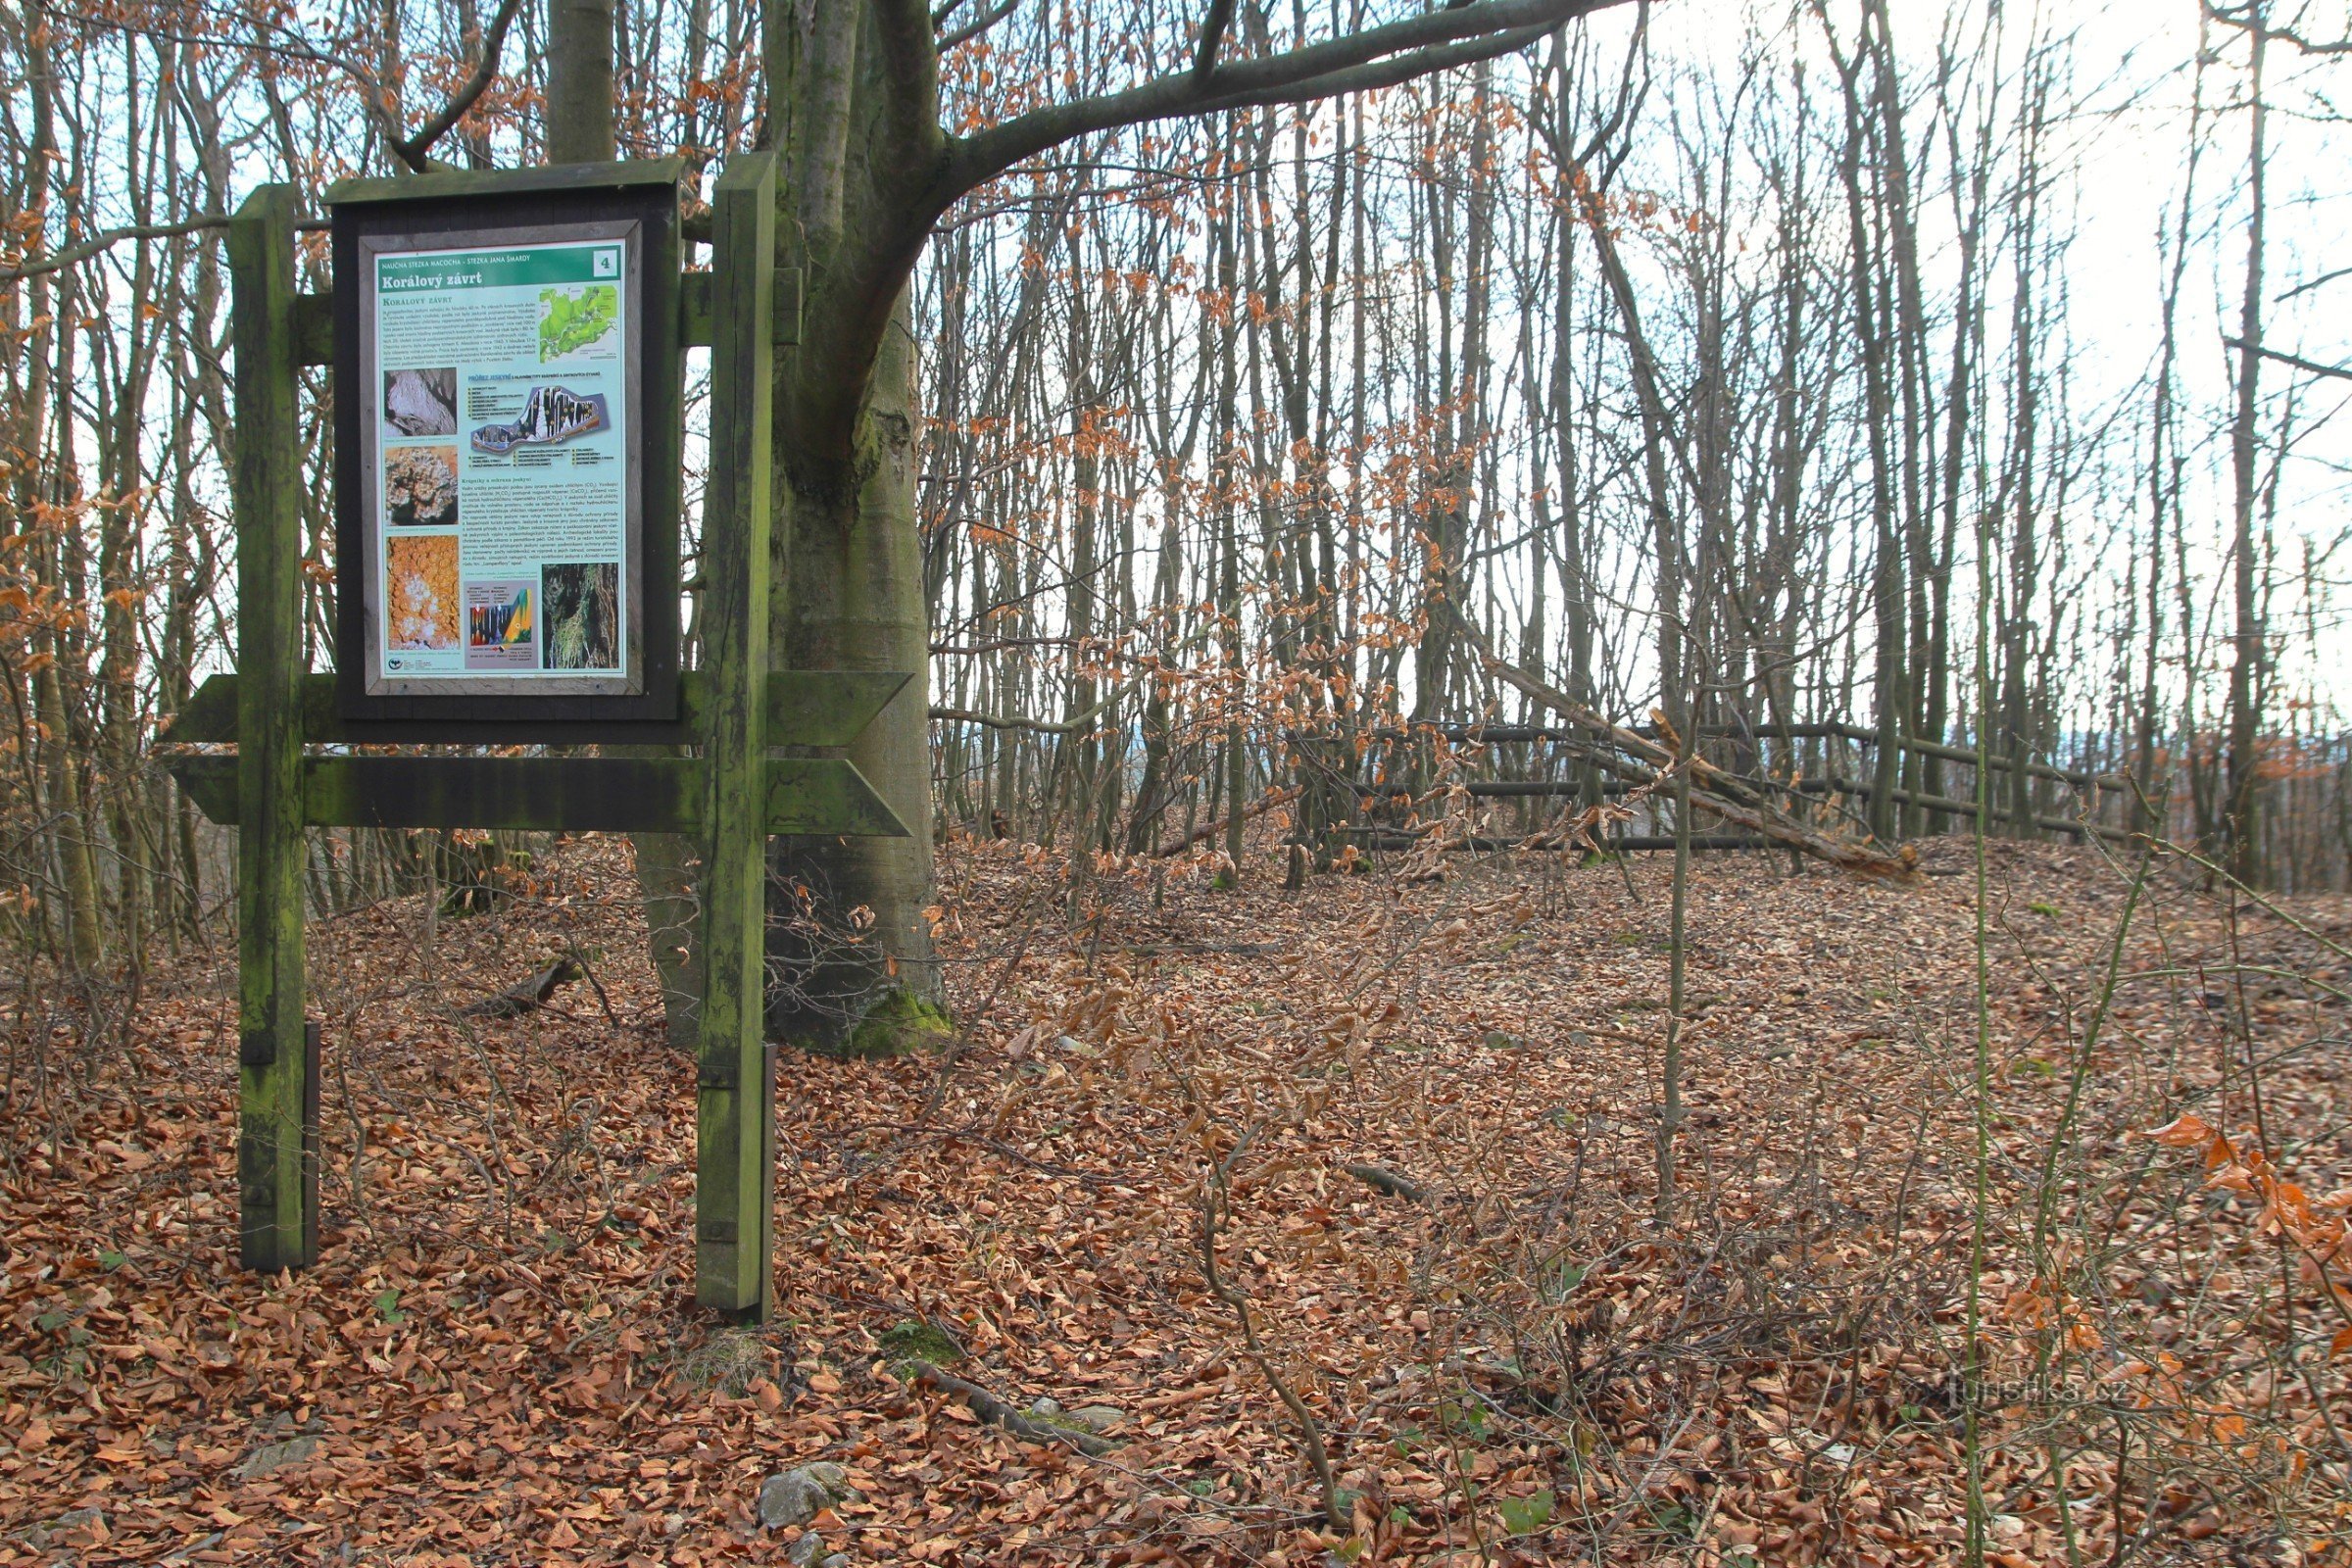 Information board of the educational trail, in the background behind the fence is the Coral Sinkhole